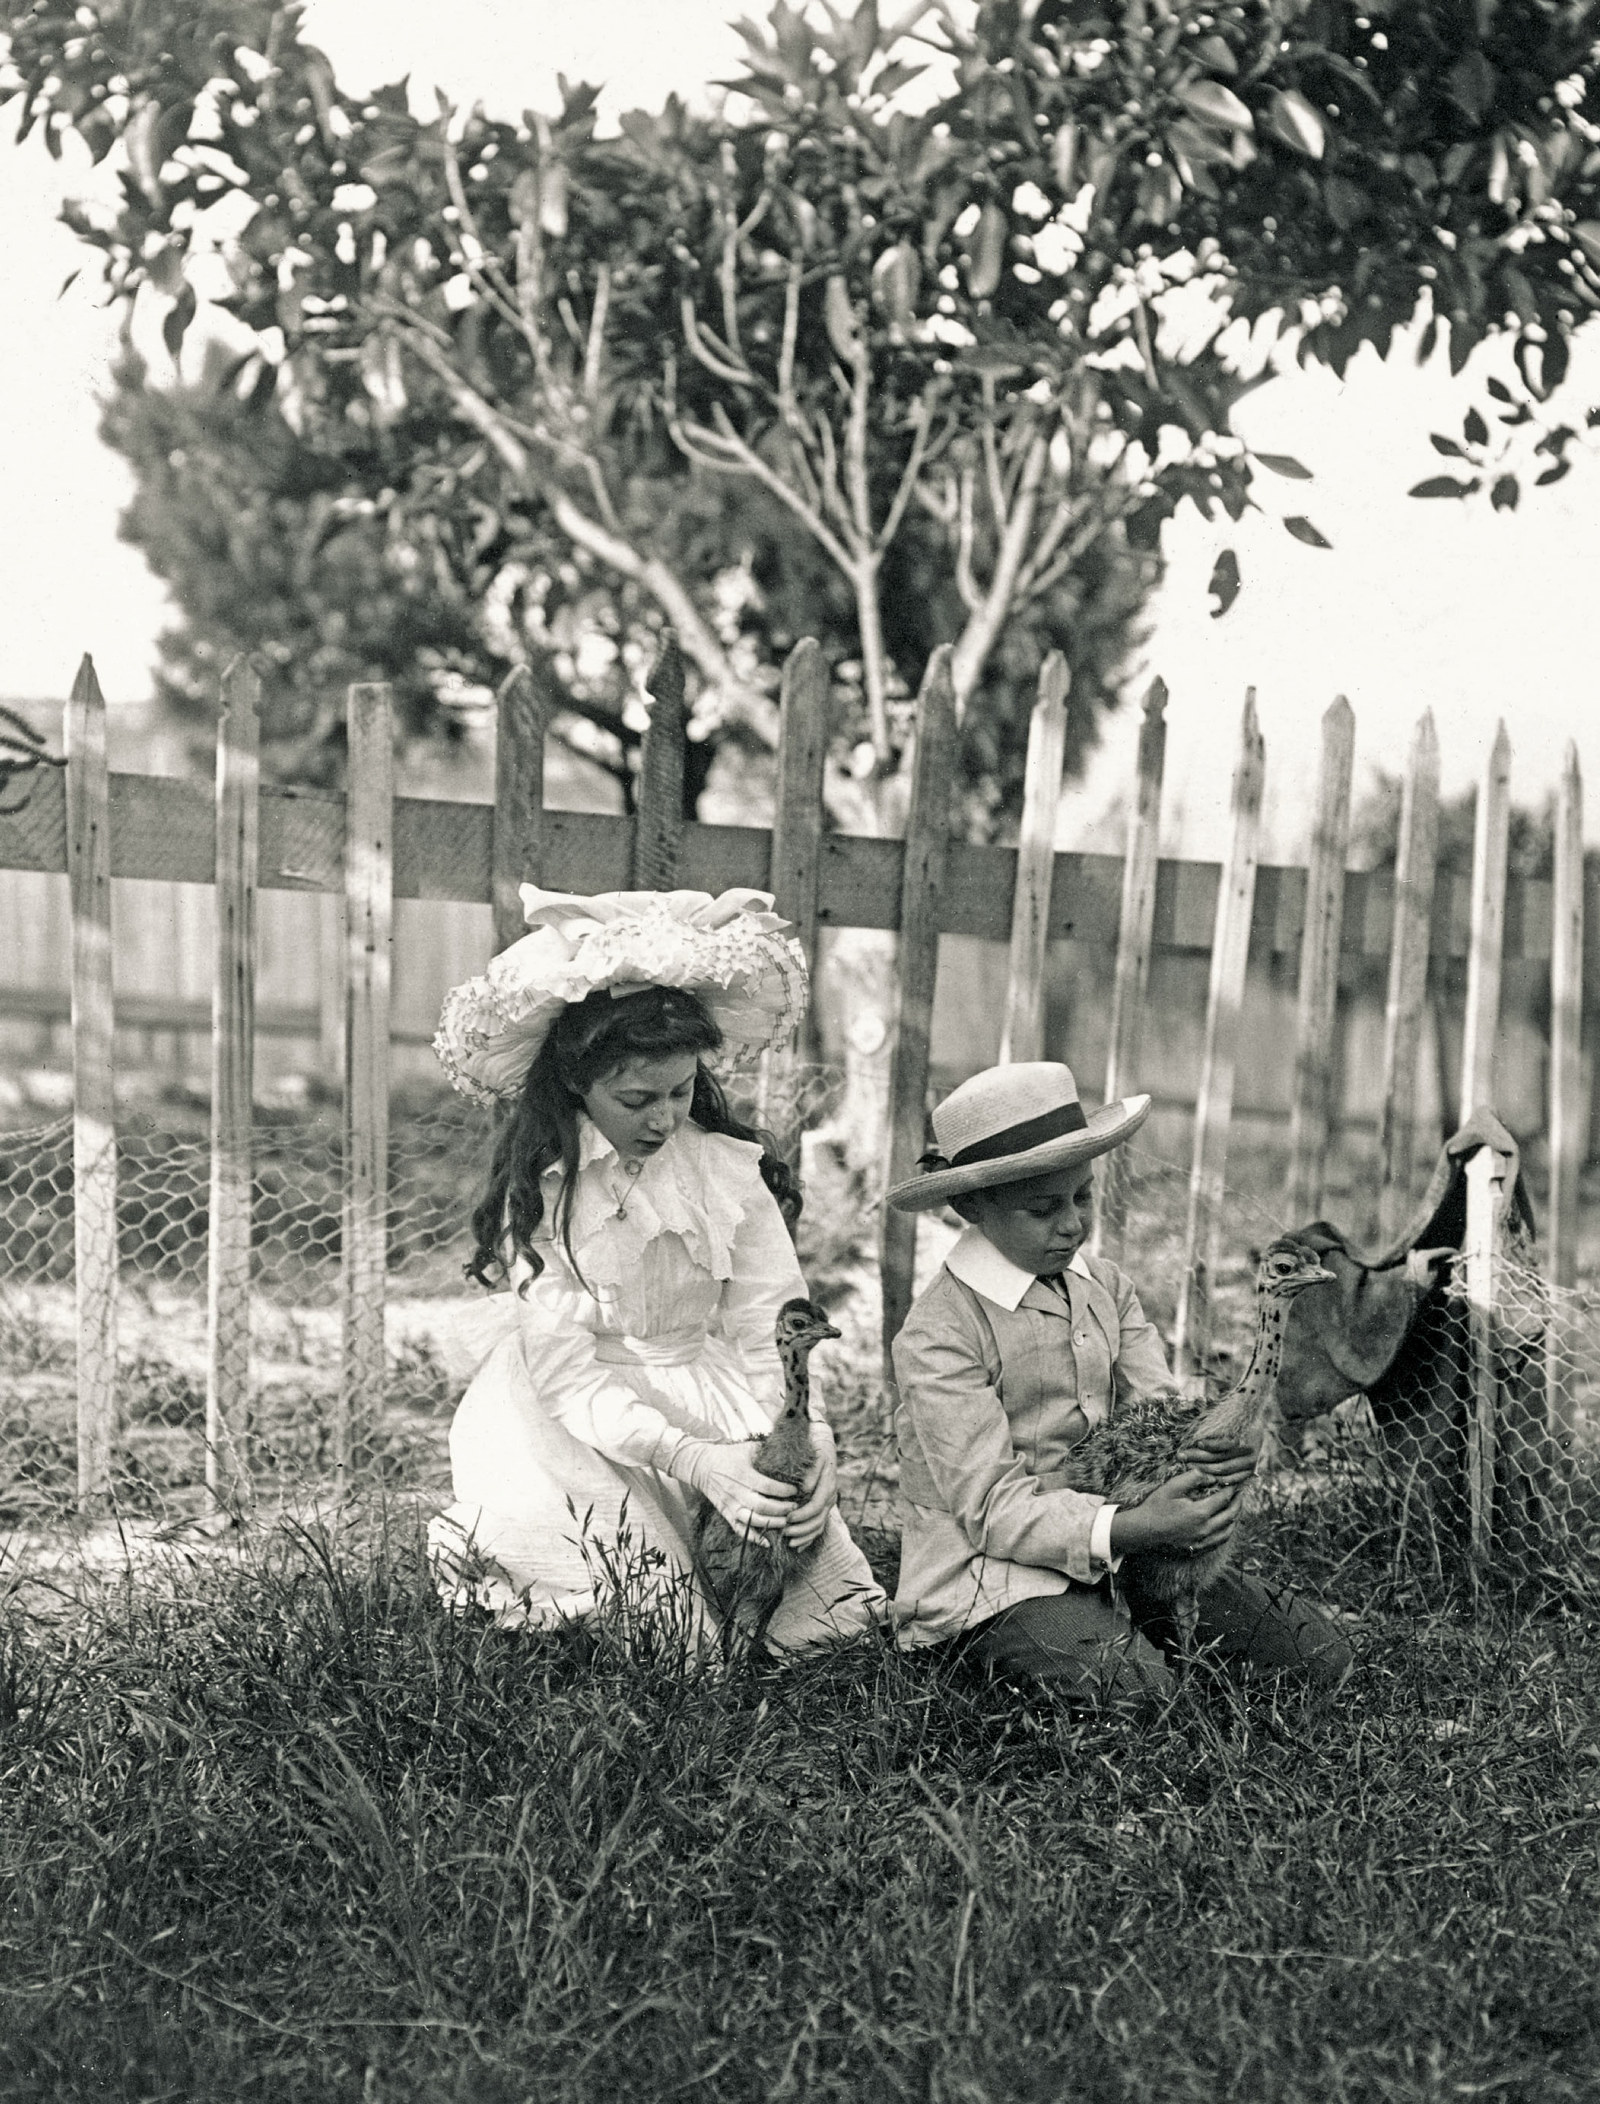 Two children, a girl with long hair and large white hat and boy with straw boater each hold a baby emu.